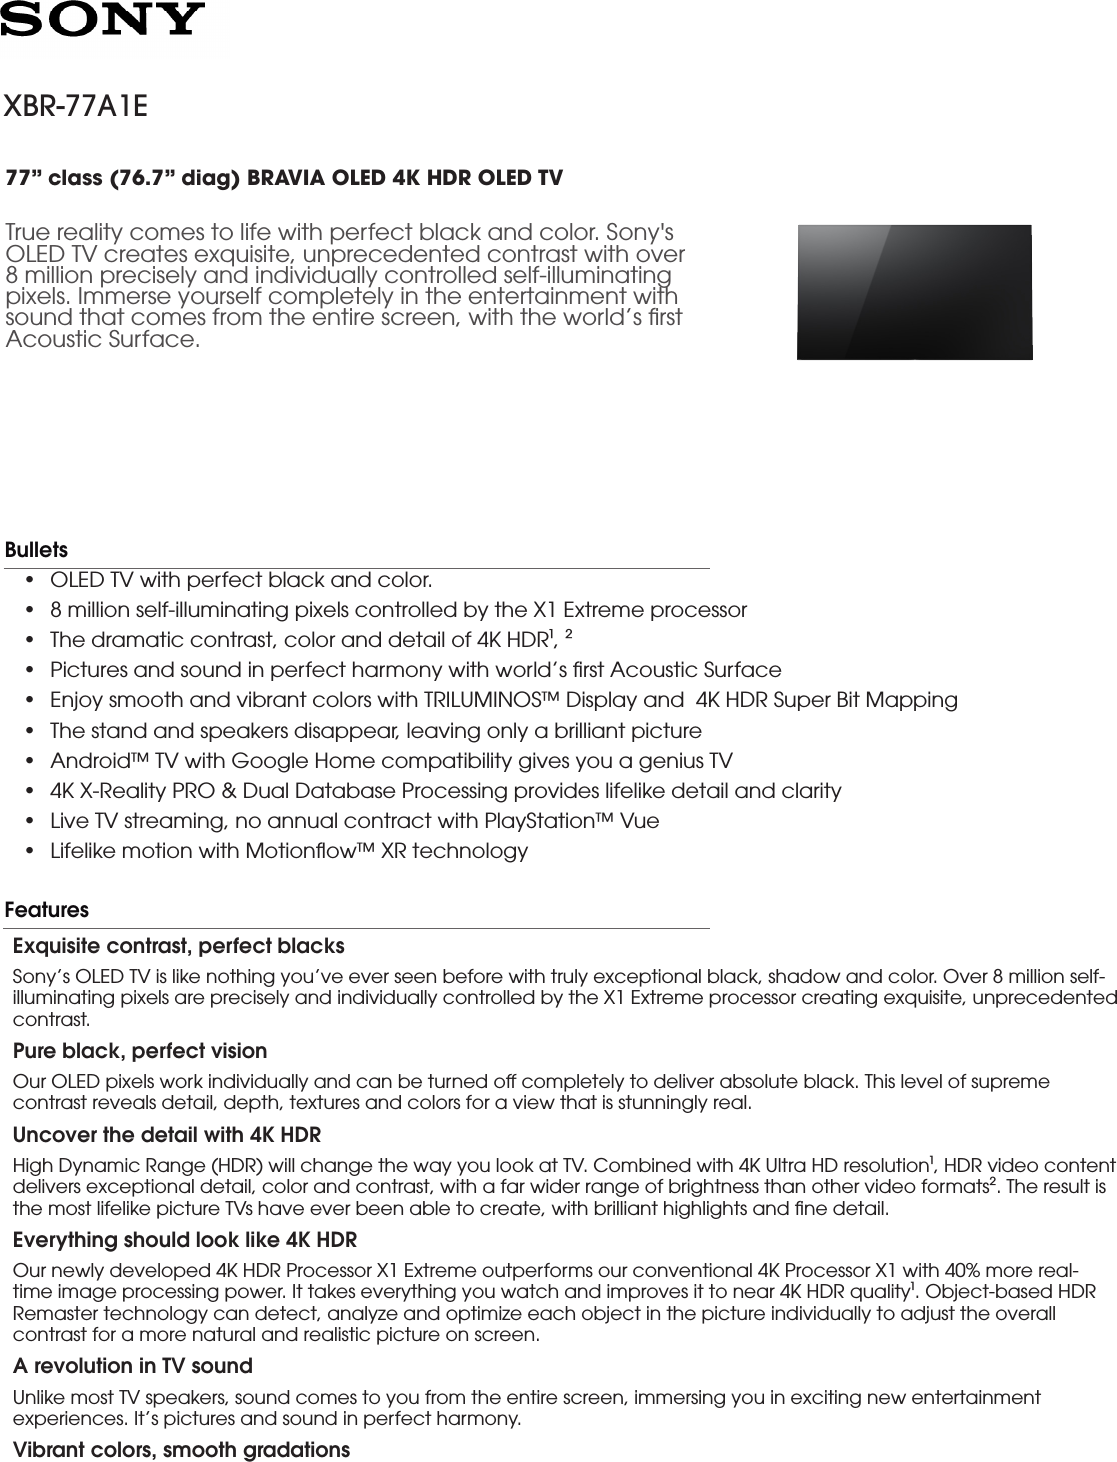 Page 1 of 5 - Sony XBR-77A1E User Manual Marketing Specifications XBR77A1E Mksp